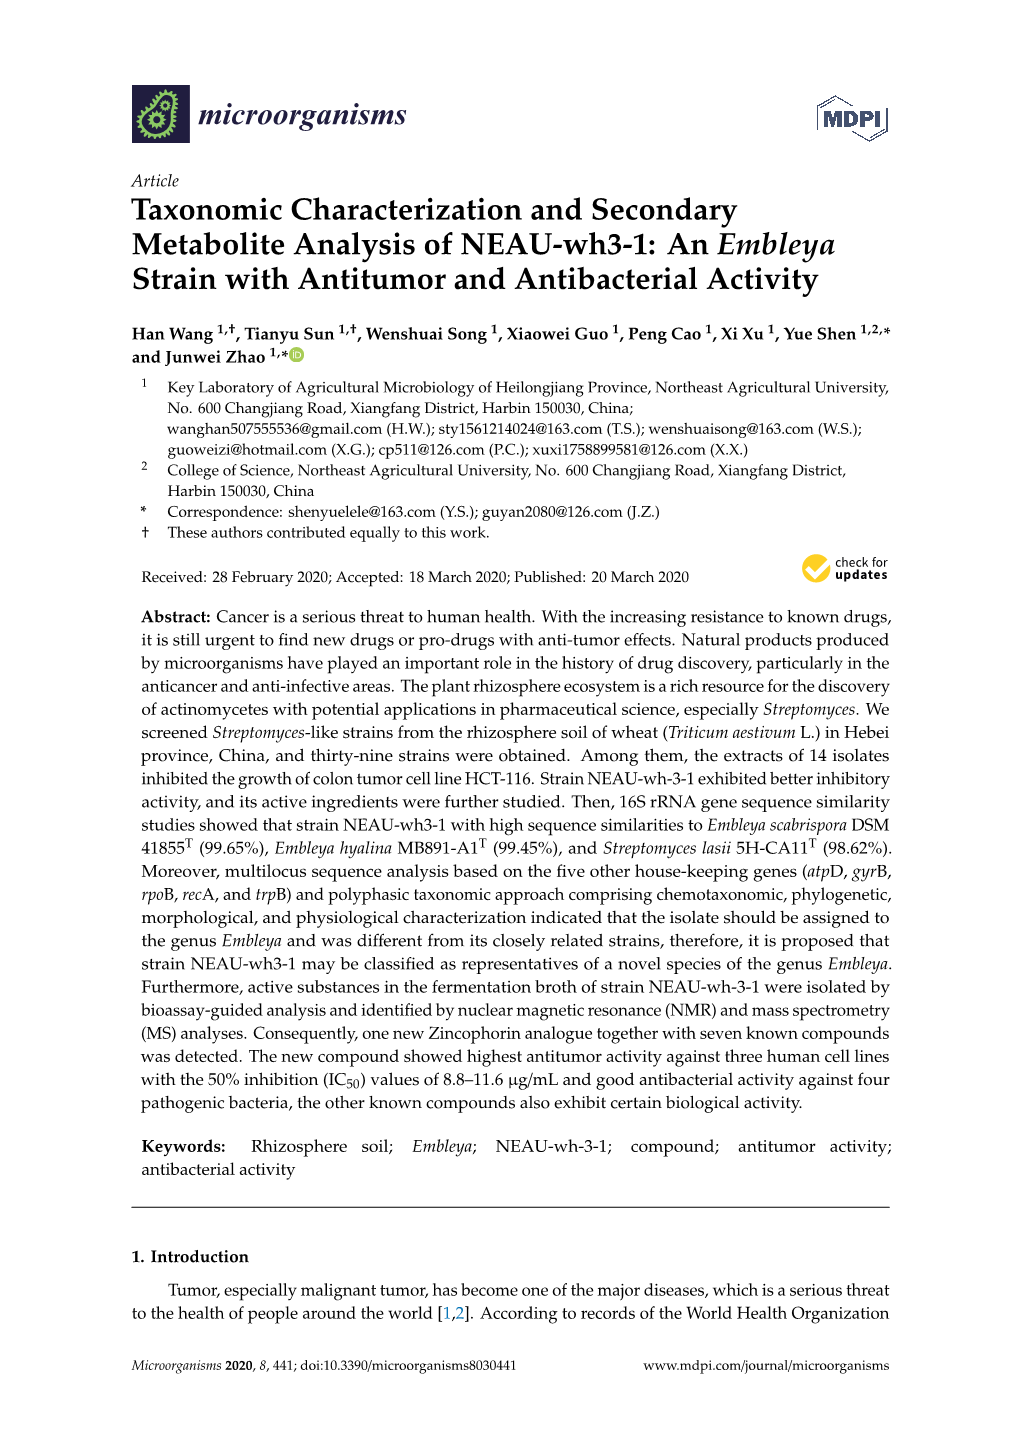 Taxonomic Characterization and Secondary Metabolite Analysis of NEAU-Wh3-1: an Embleya Strain with Antitumor and Antibacterial Activity